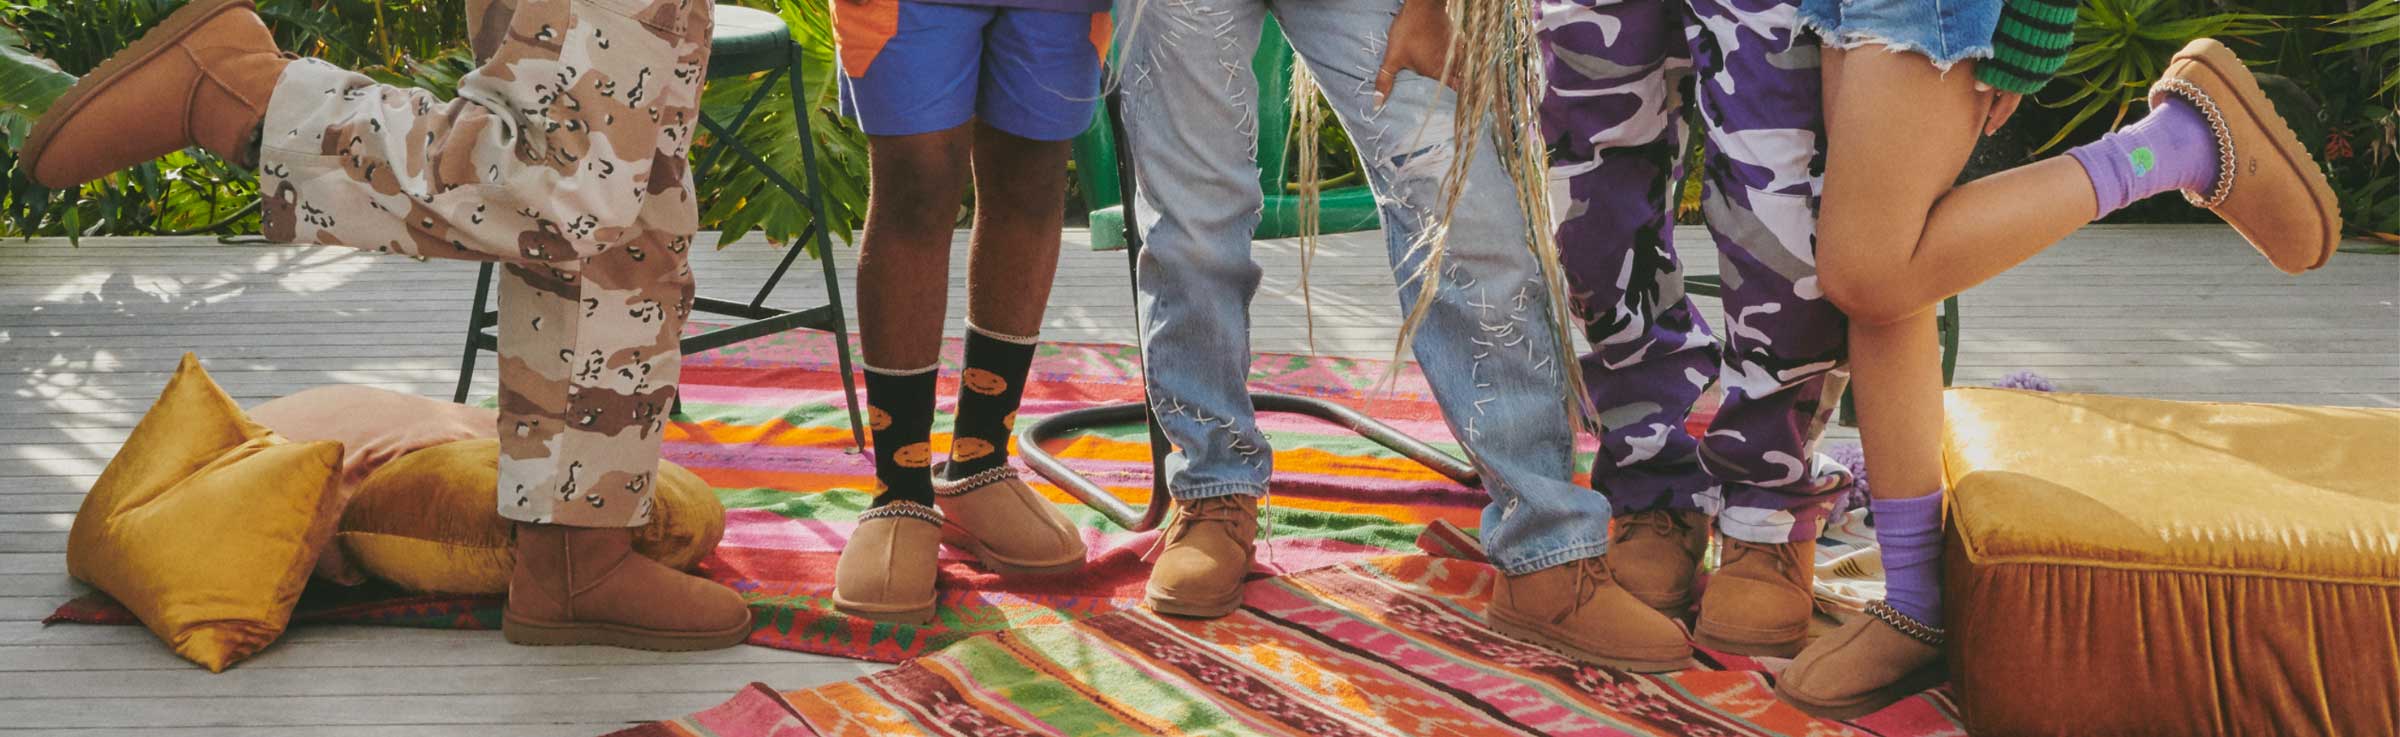 Five pairs of legs with UGG chestnut slippers and boots on colorful rugs